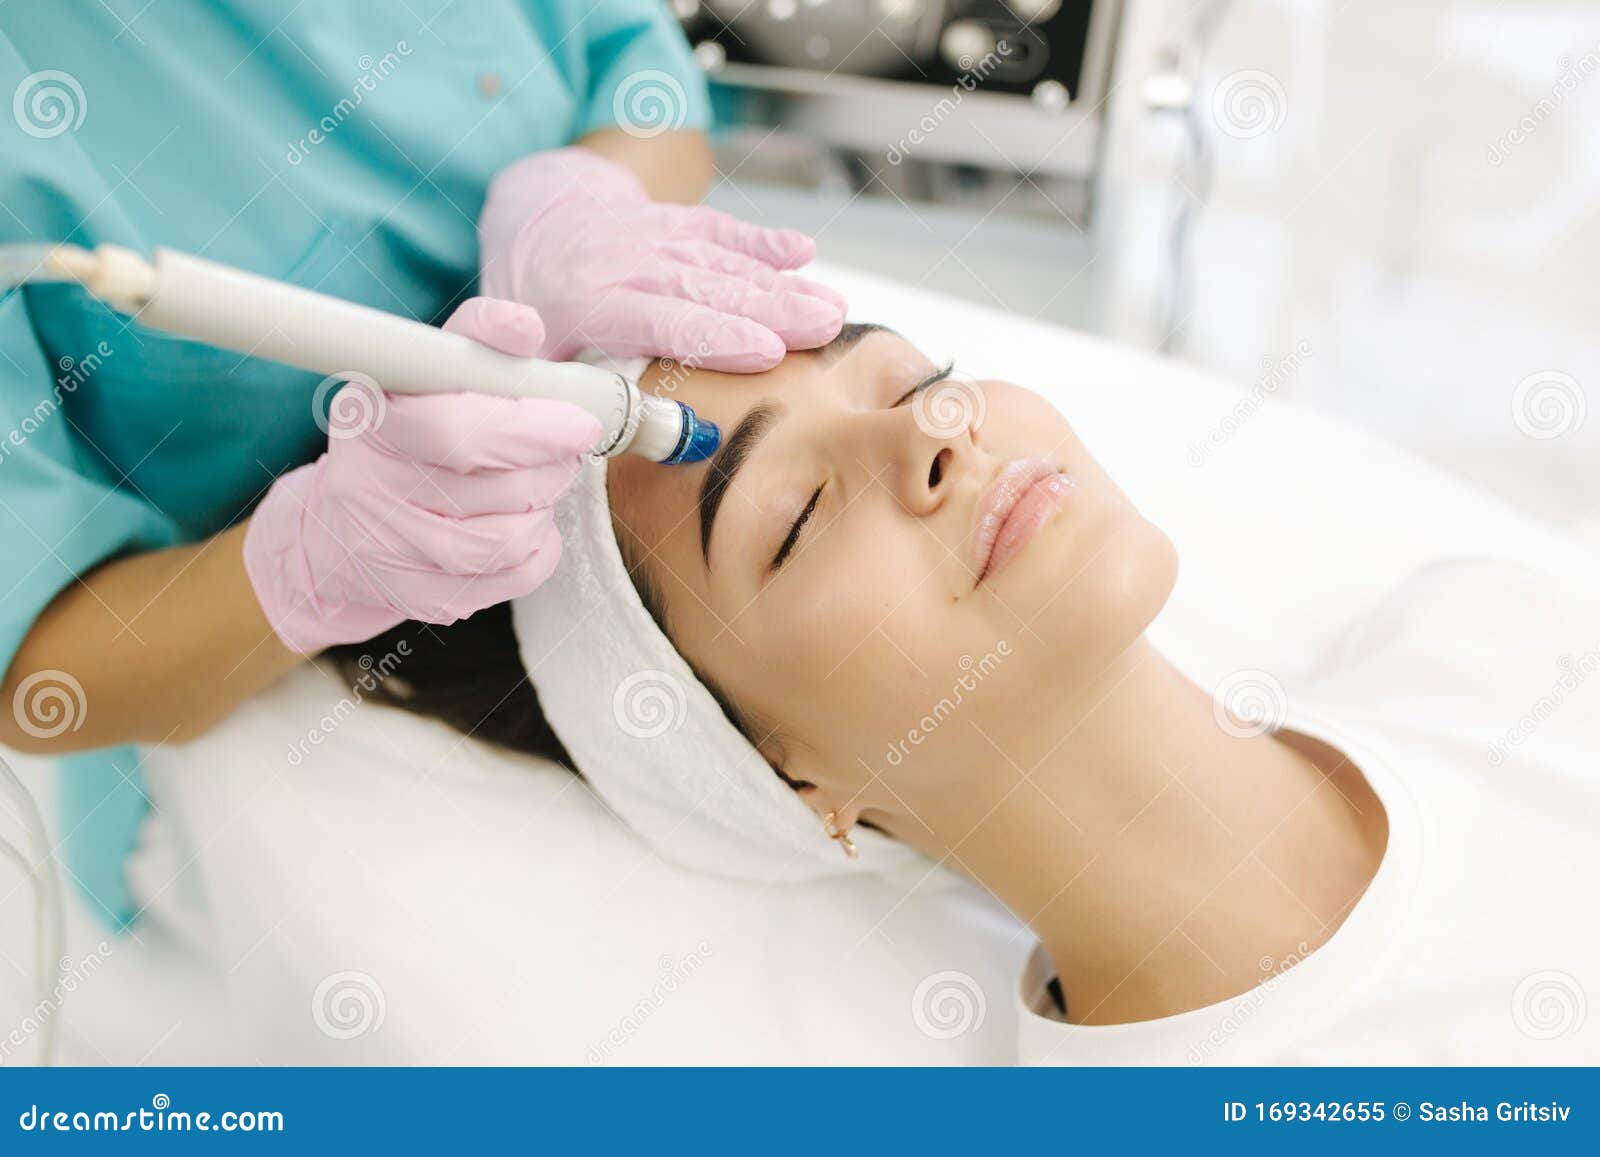 Facial - Microdermabrasion - The Beauty Spa